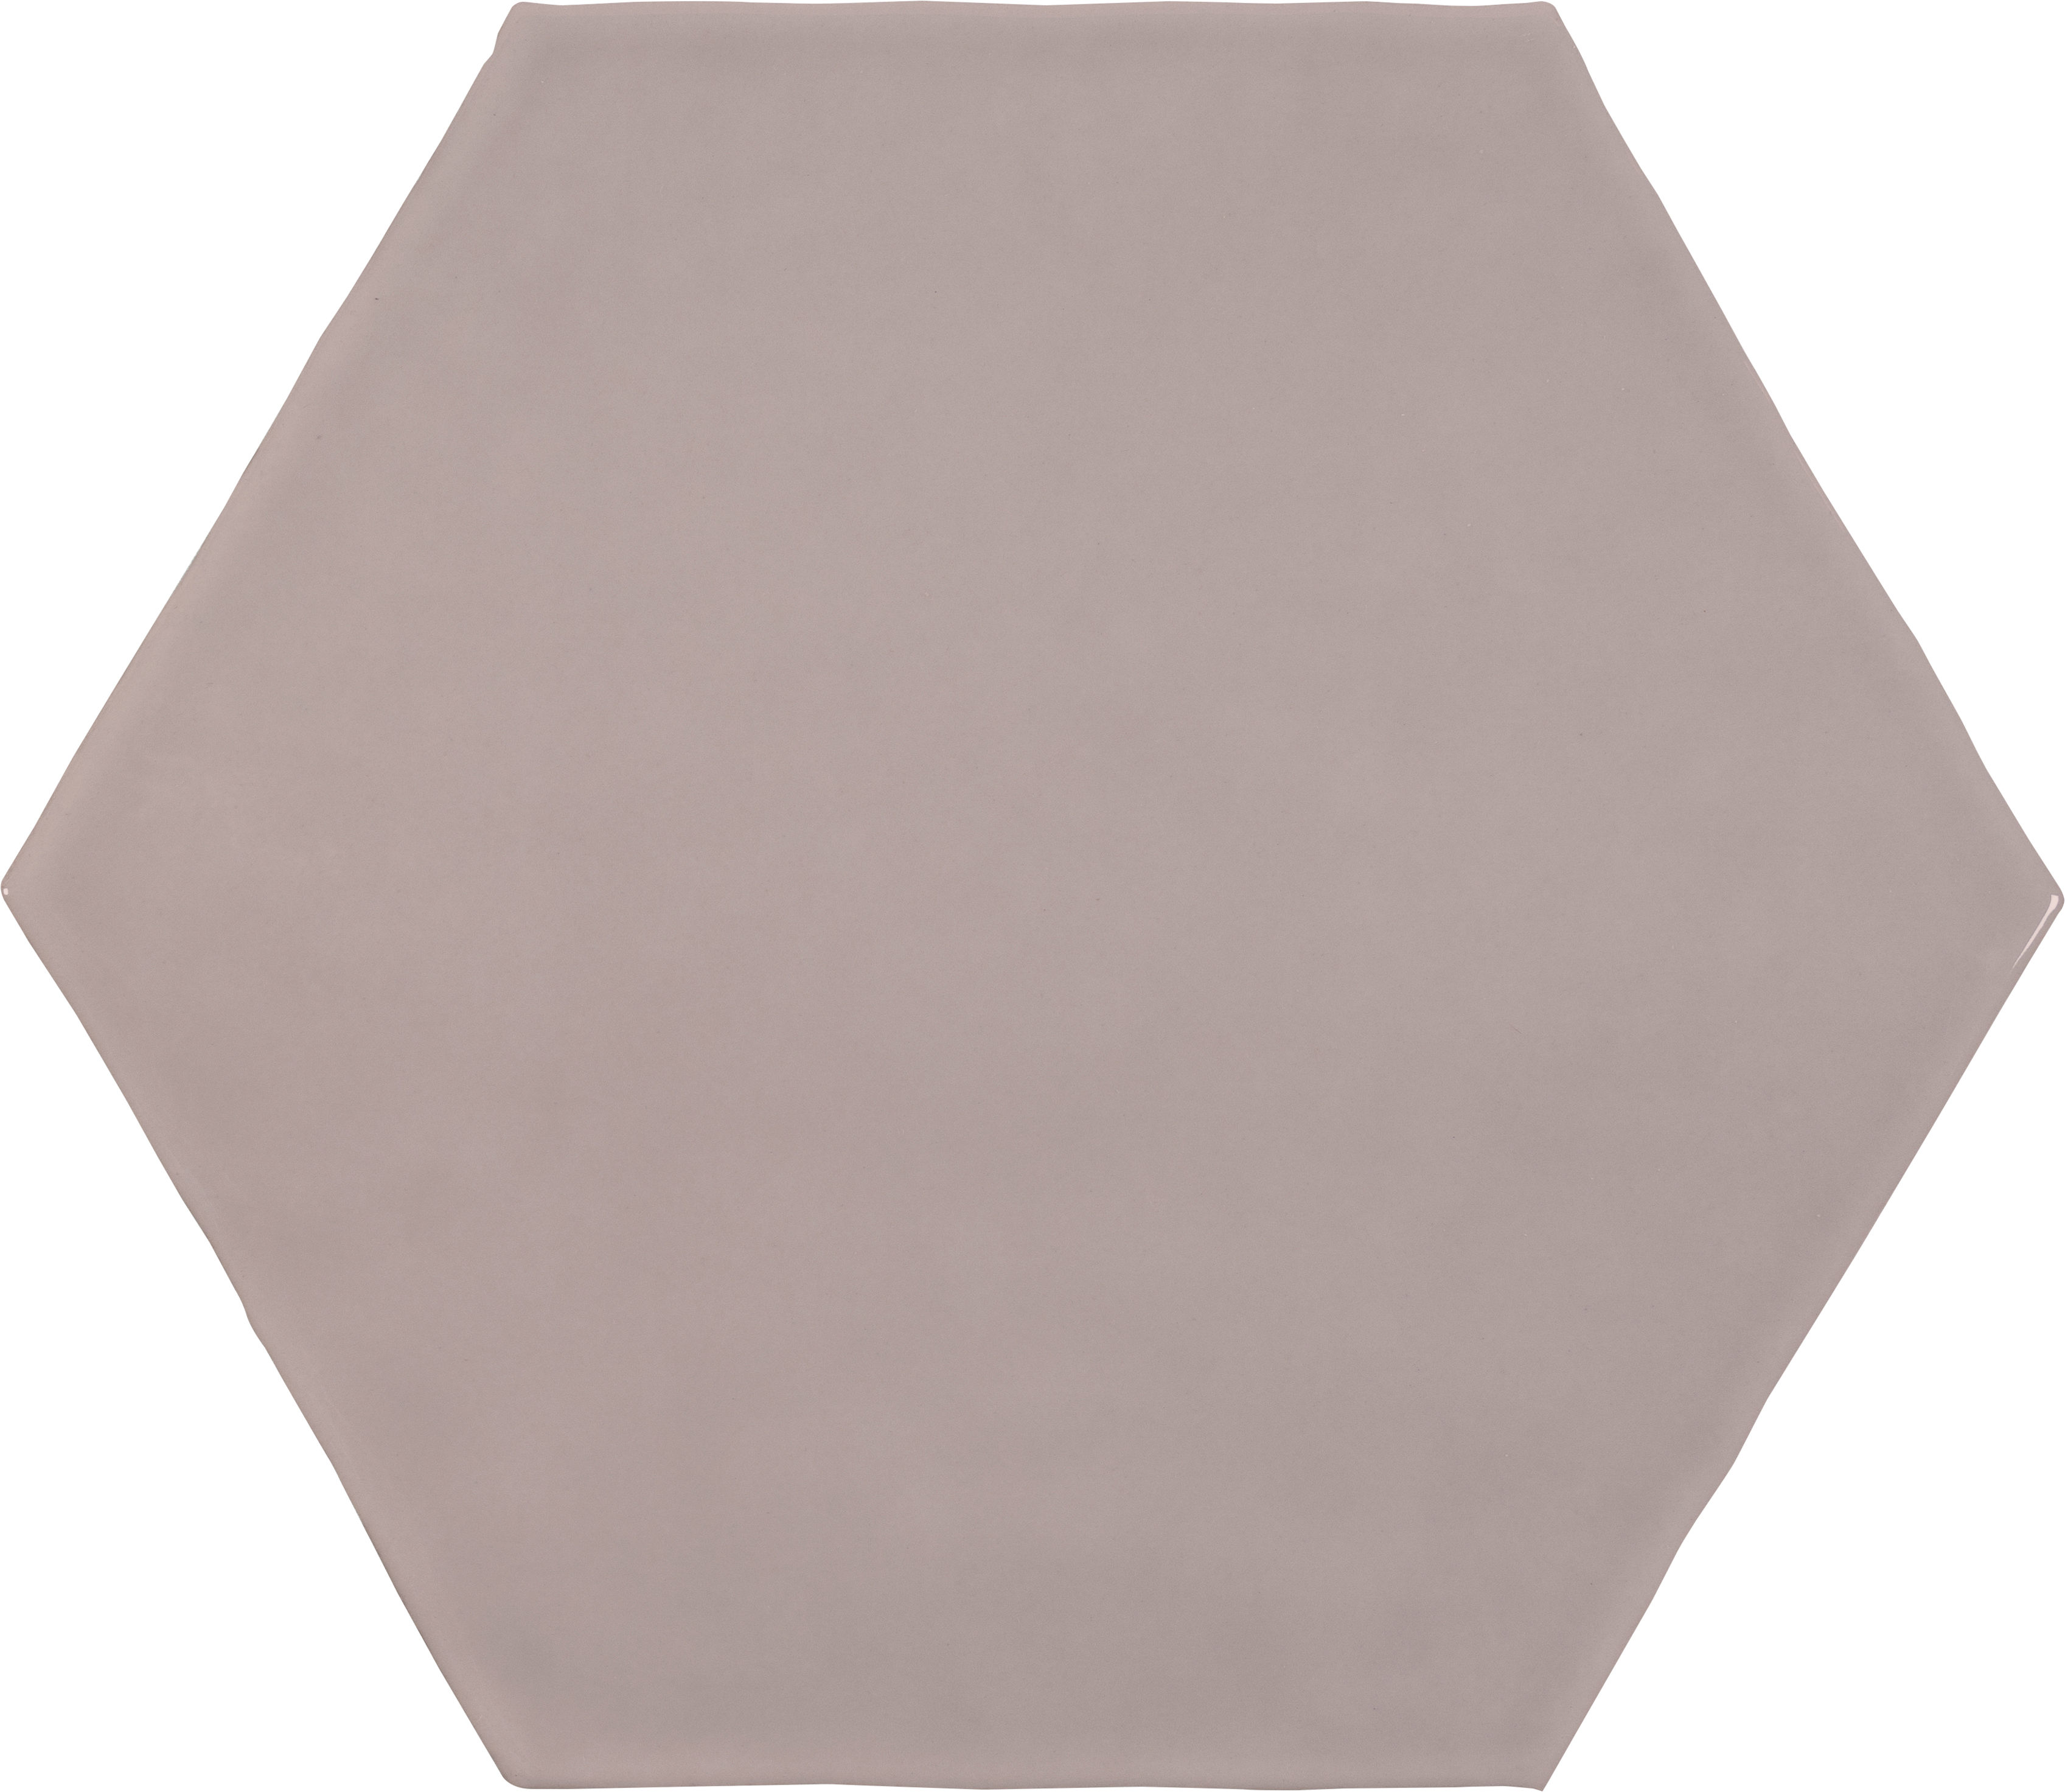 petal pattern glazed ceramic field tile from teramoda anatolia collection distributed by surface group international glossy finish pressed edge 6-inch hexagon shape